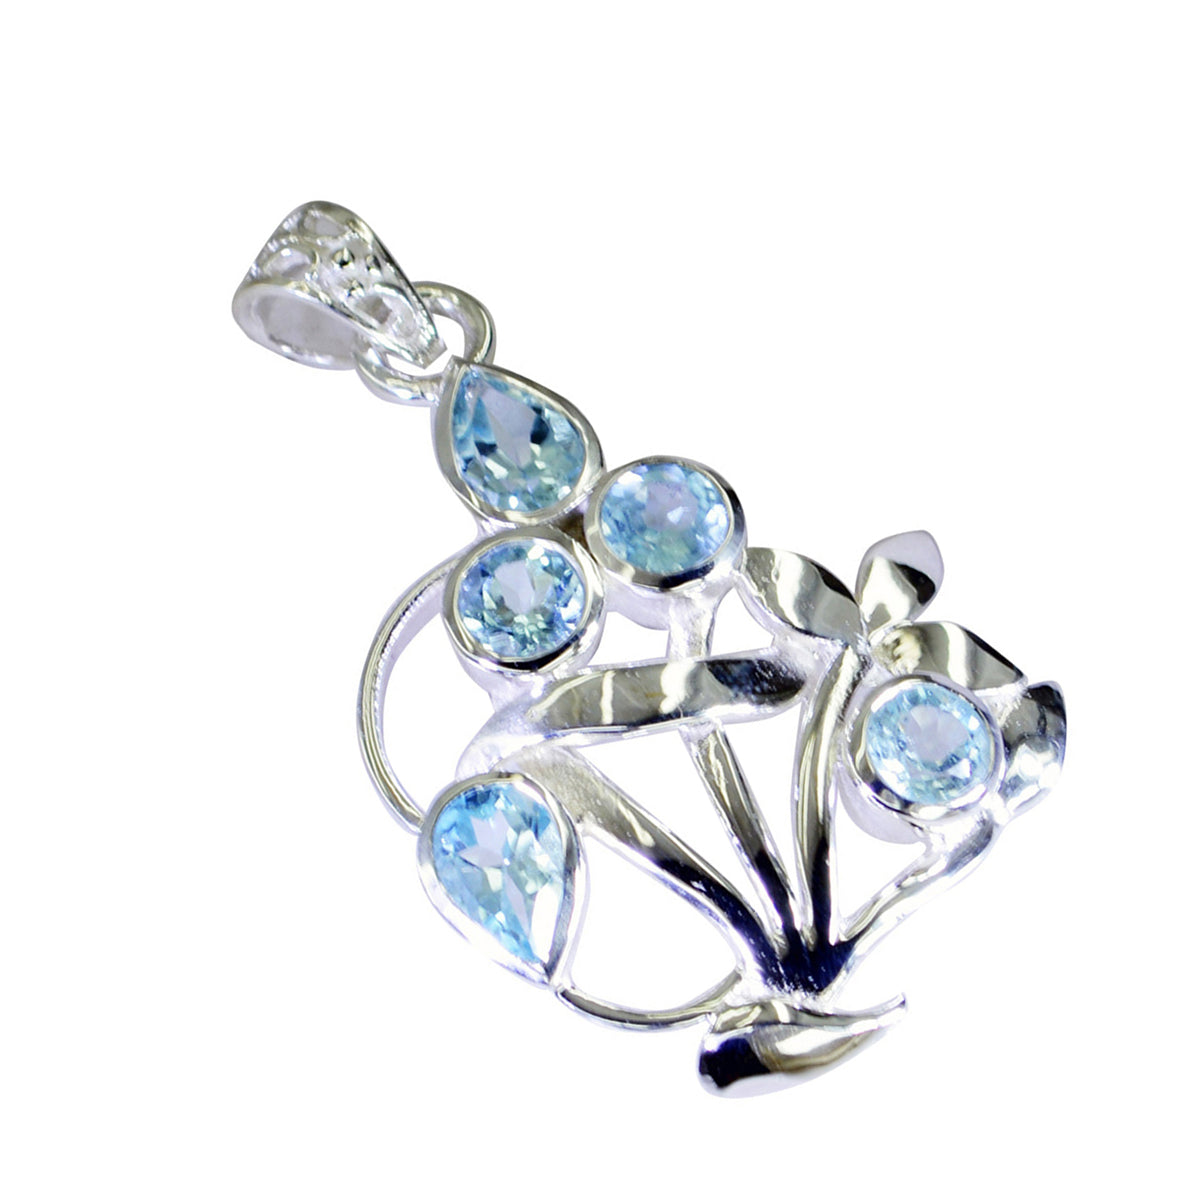 Riyo Irresistible Gems Multi Faceted Blue Blue Topaz Solid Silver Pendant Gift For Good Friday